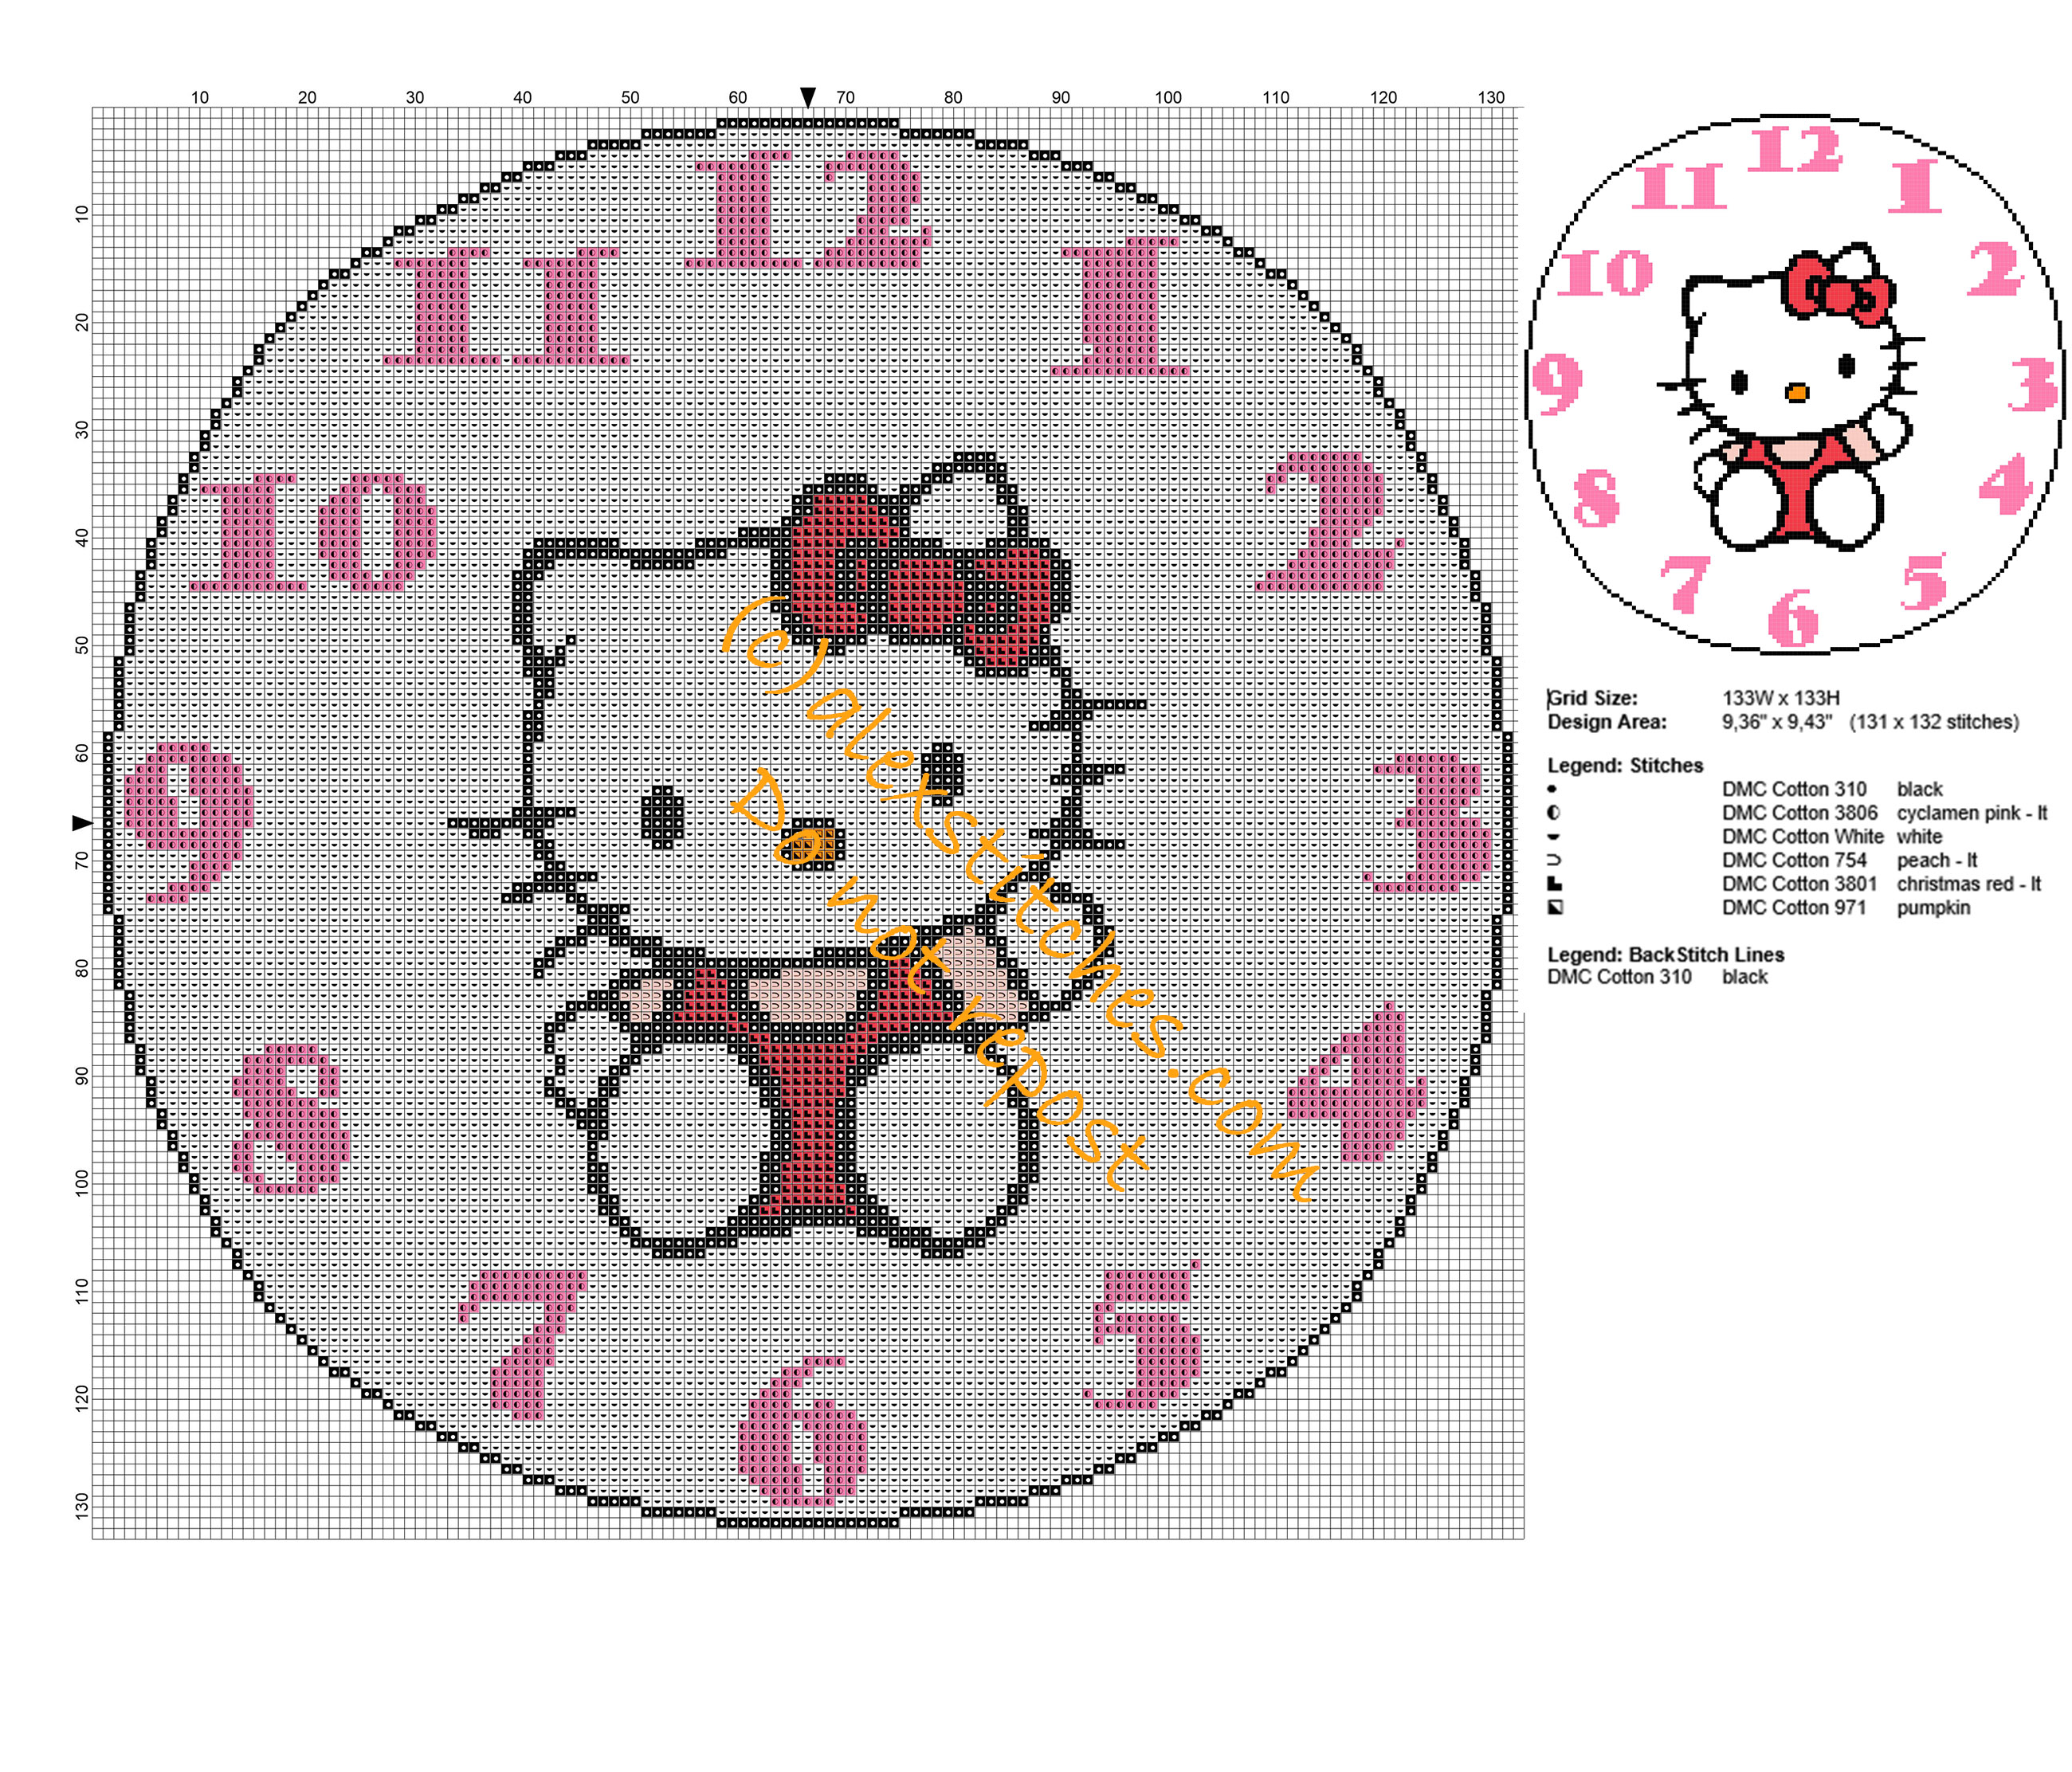 Clock for children’ s bedroom with Hello Kitty free cross stitch pattern